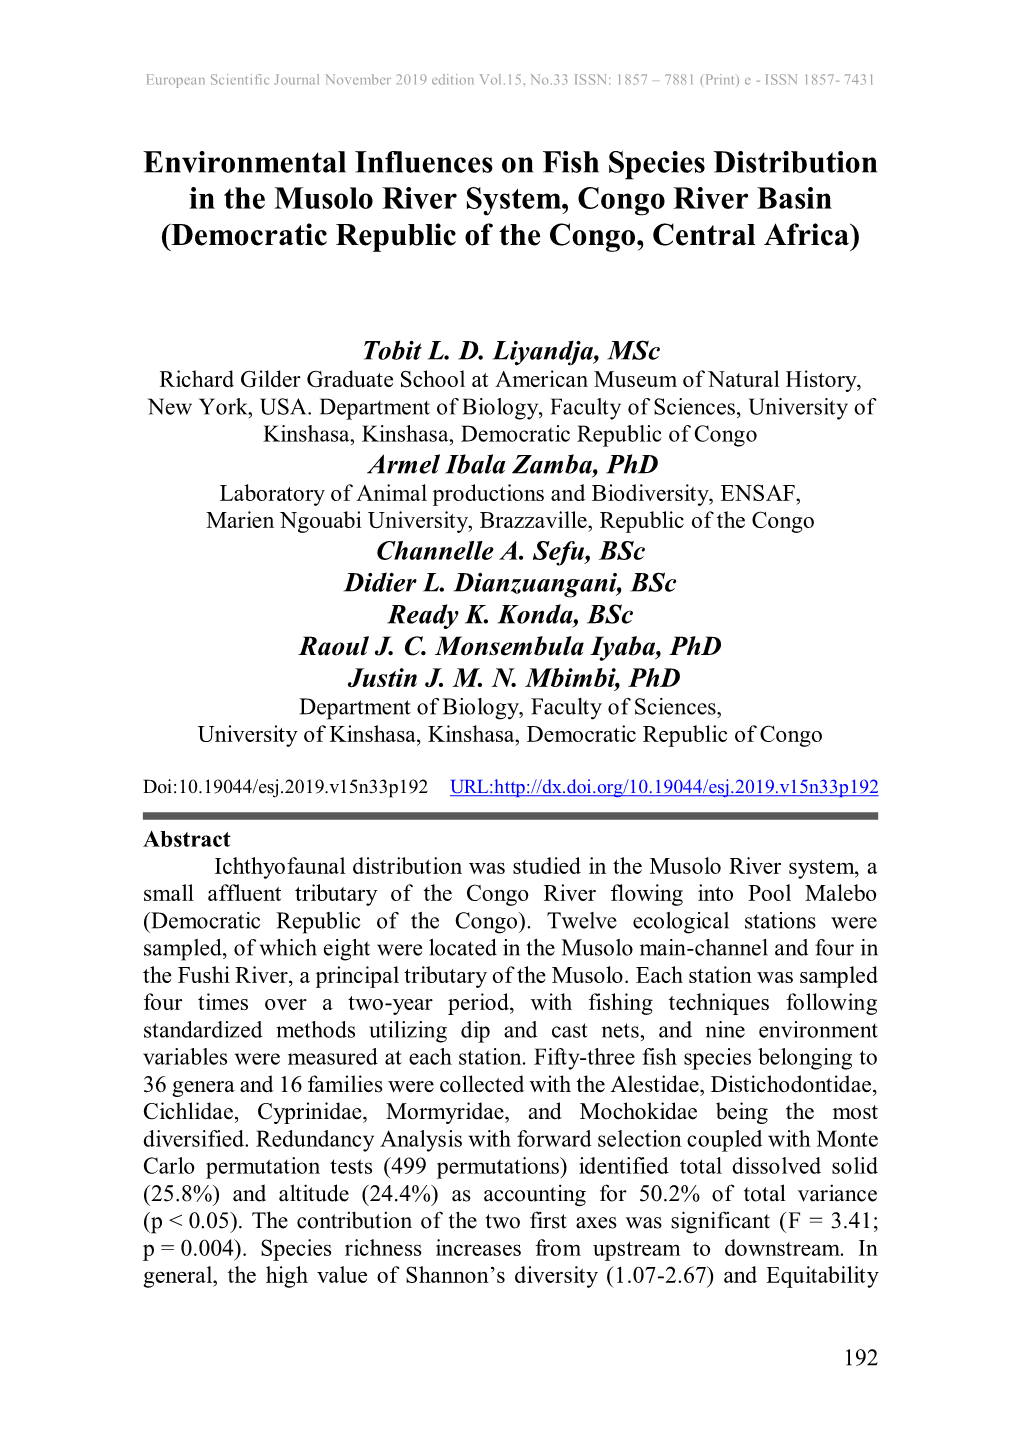 Environmental Influences on Fish Species Distribution in the Musolo River System, Congo River Basin (Democratic Republic of the Congo, Central Africa)